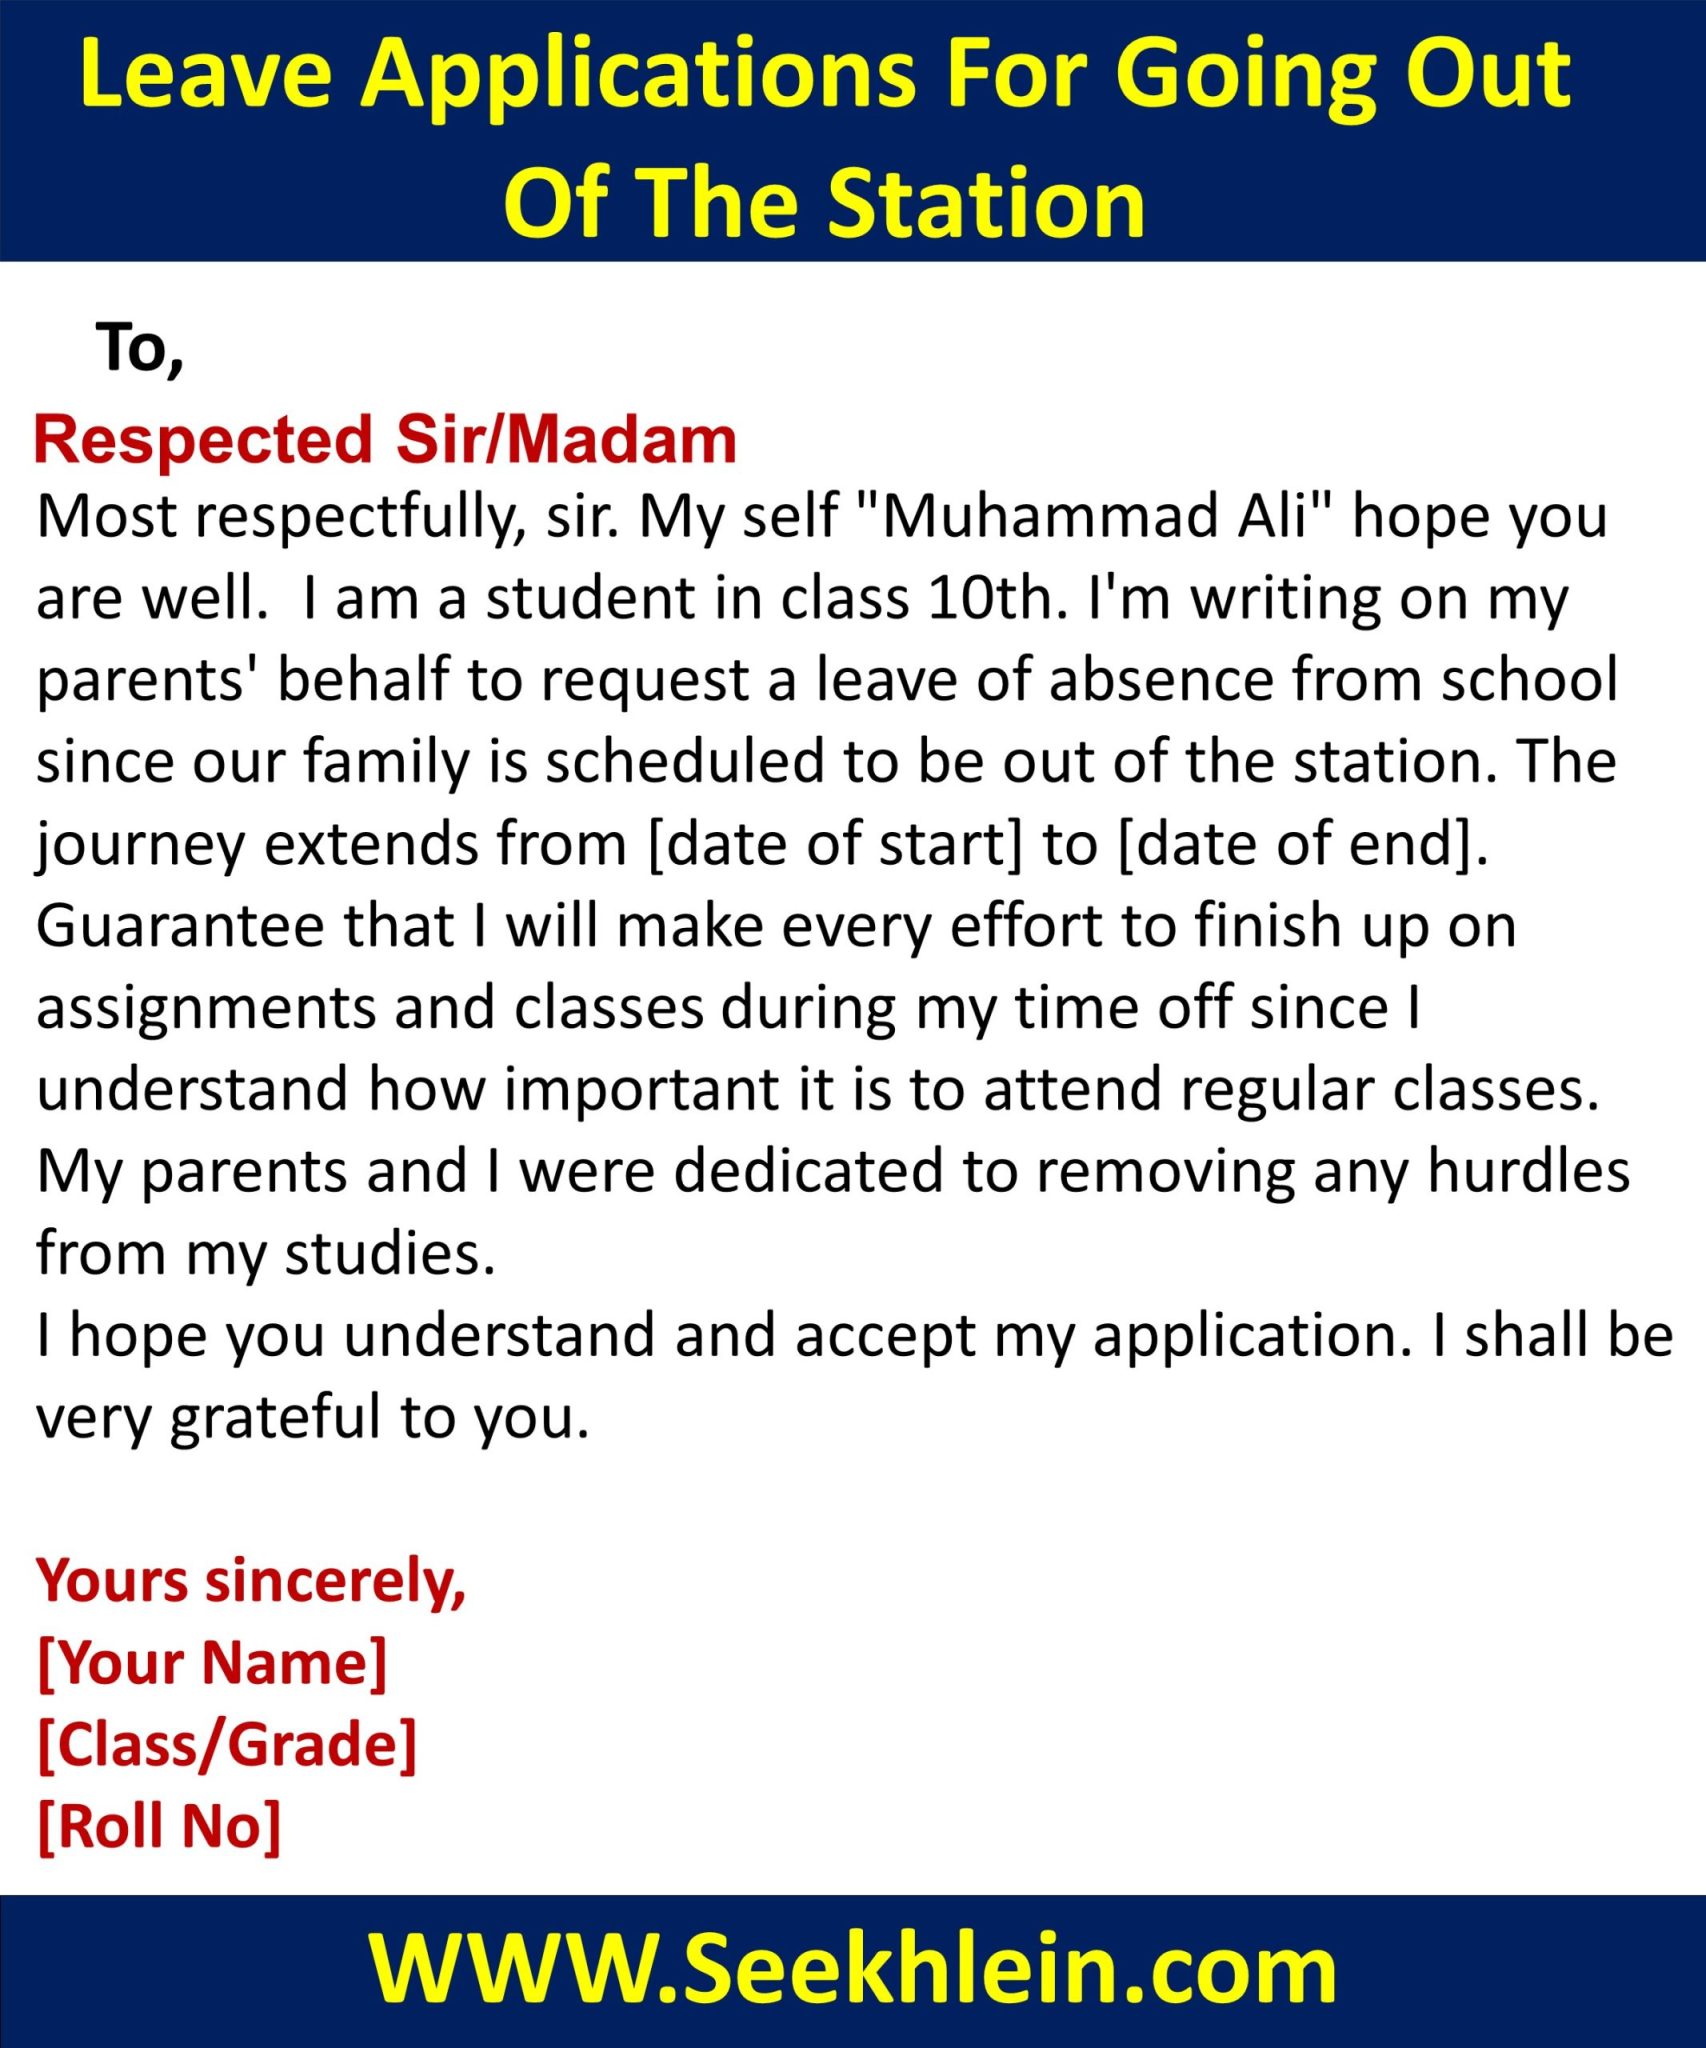 Leave Application To Principal For Going Out Of Station By Parents